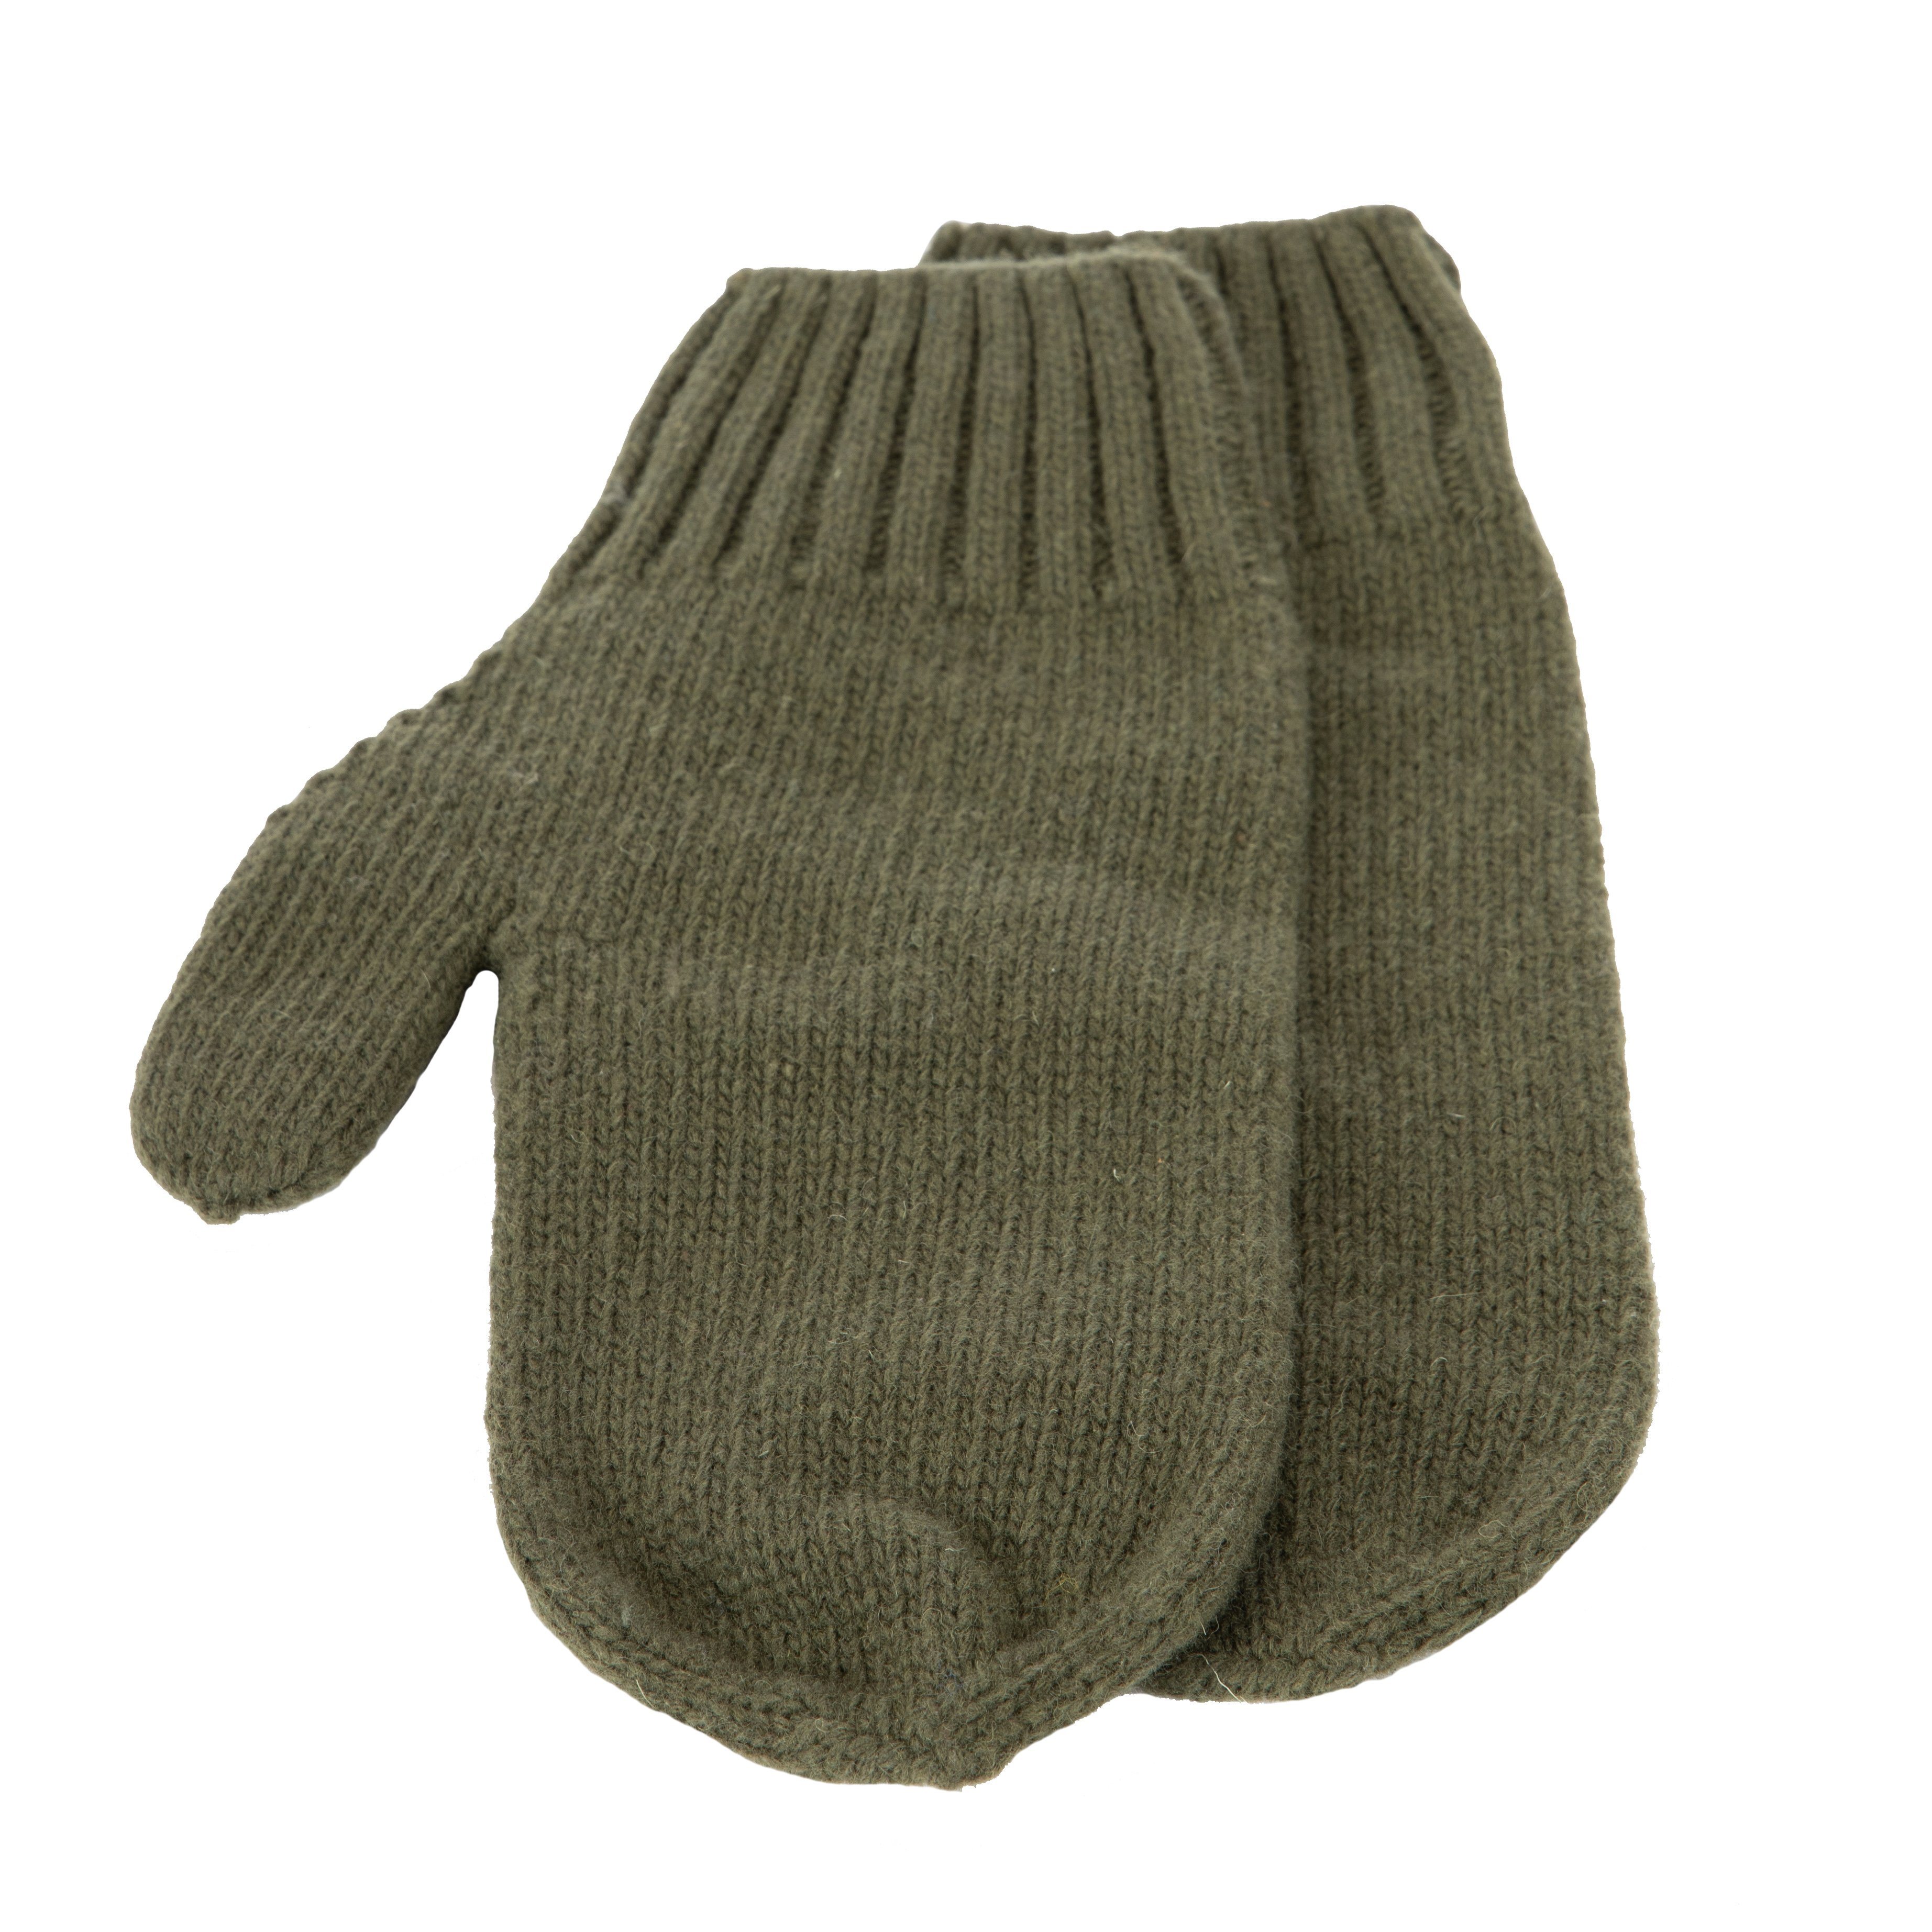 North Outdoor Kivi Mittens - 100% Merino Wool - Made in Finland, Olive Green / XL